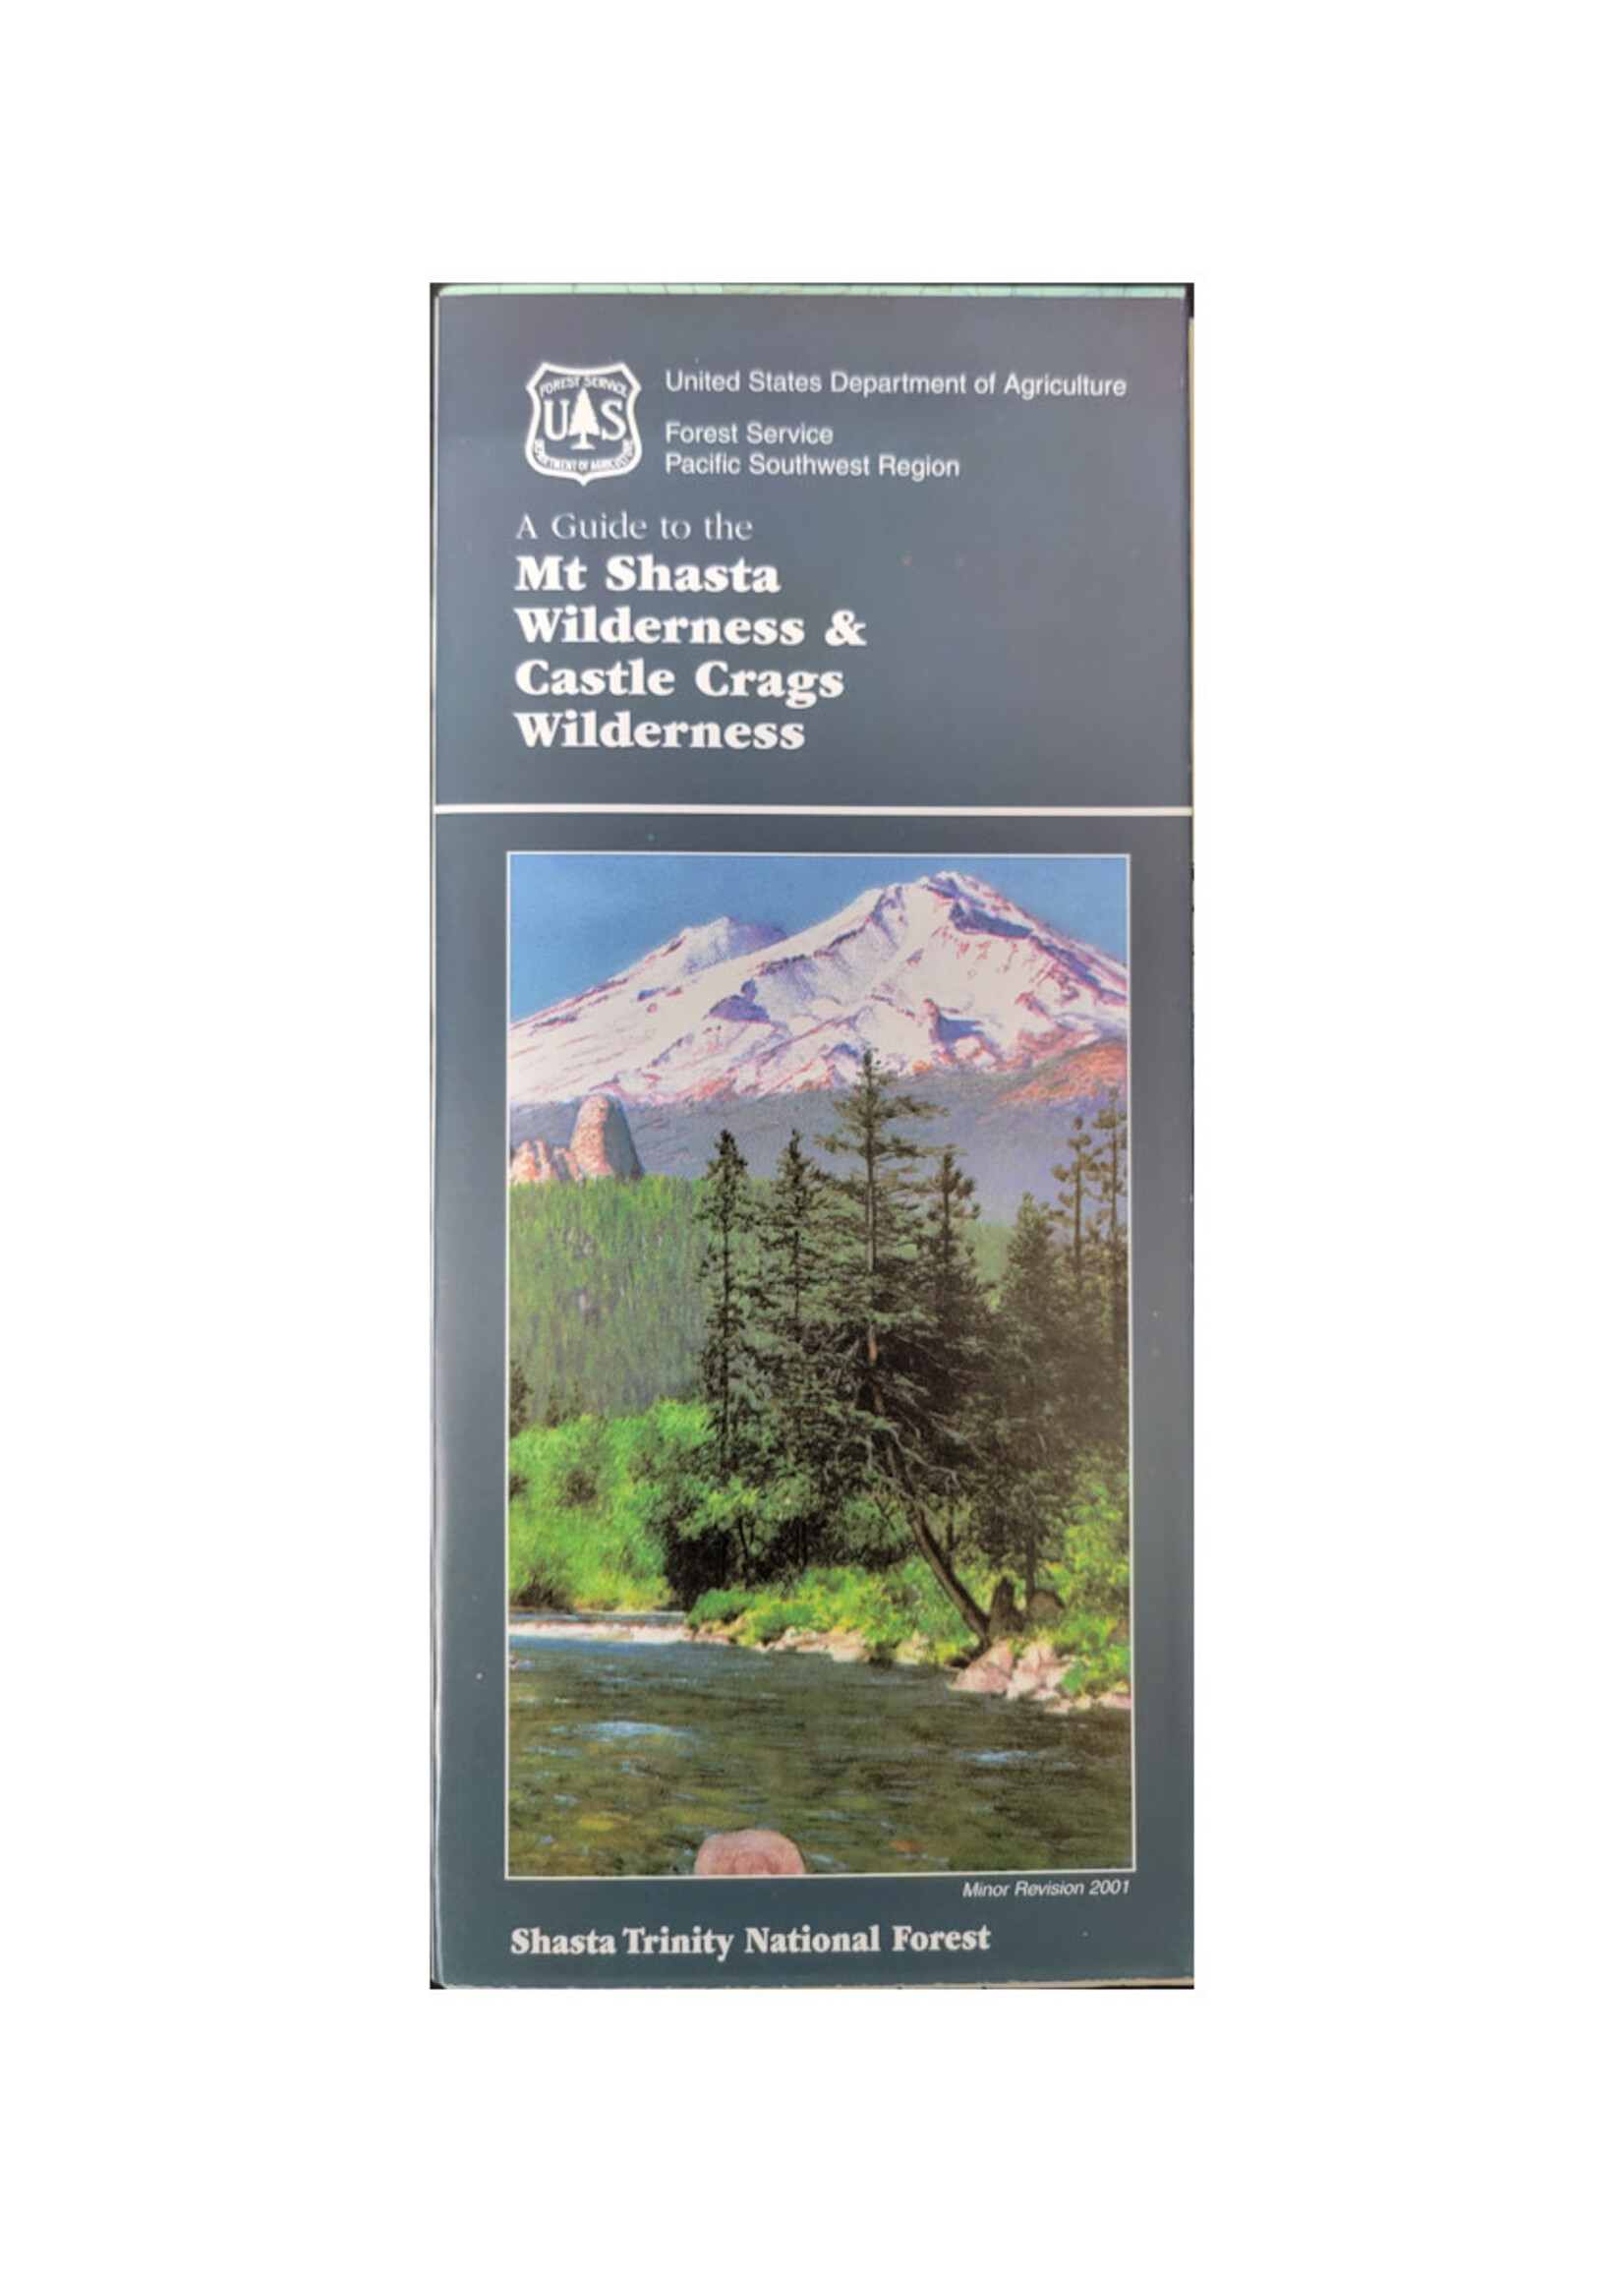 USGS Maps National Forest & Wilderness Maps including Trinity Alps Map